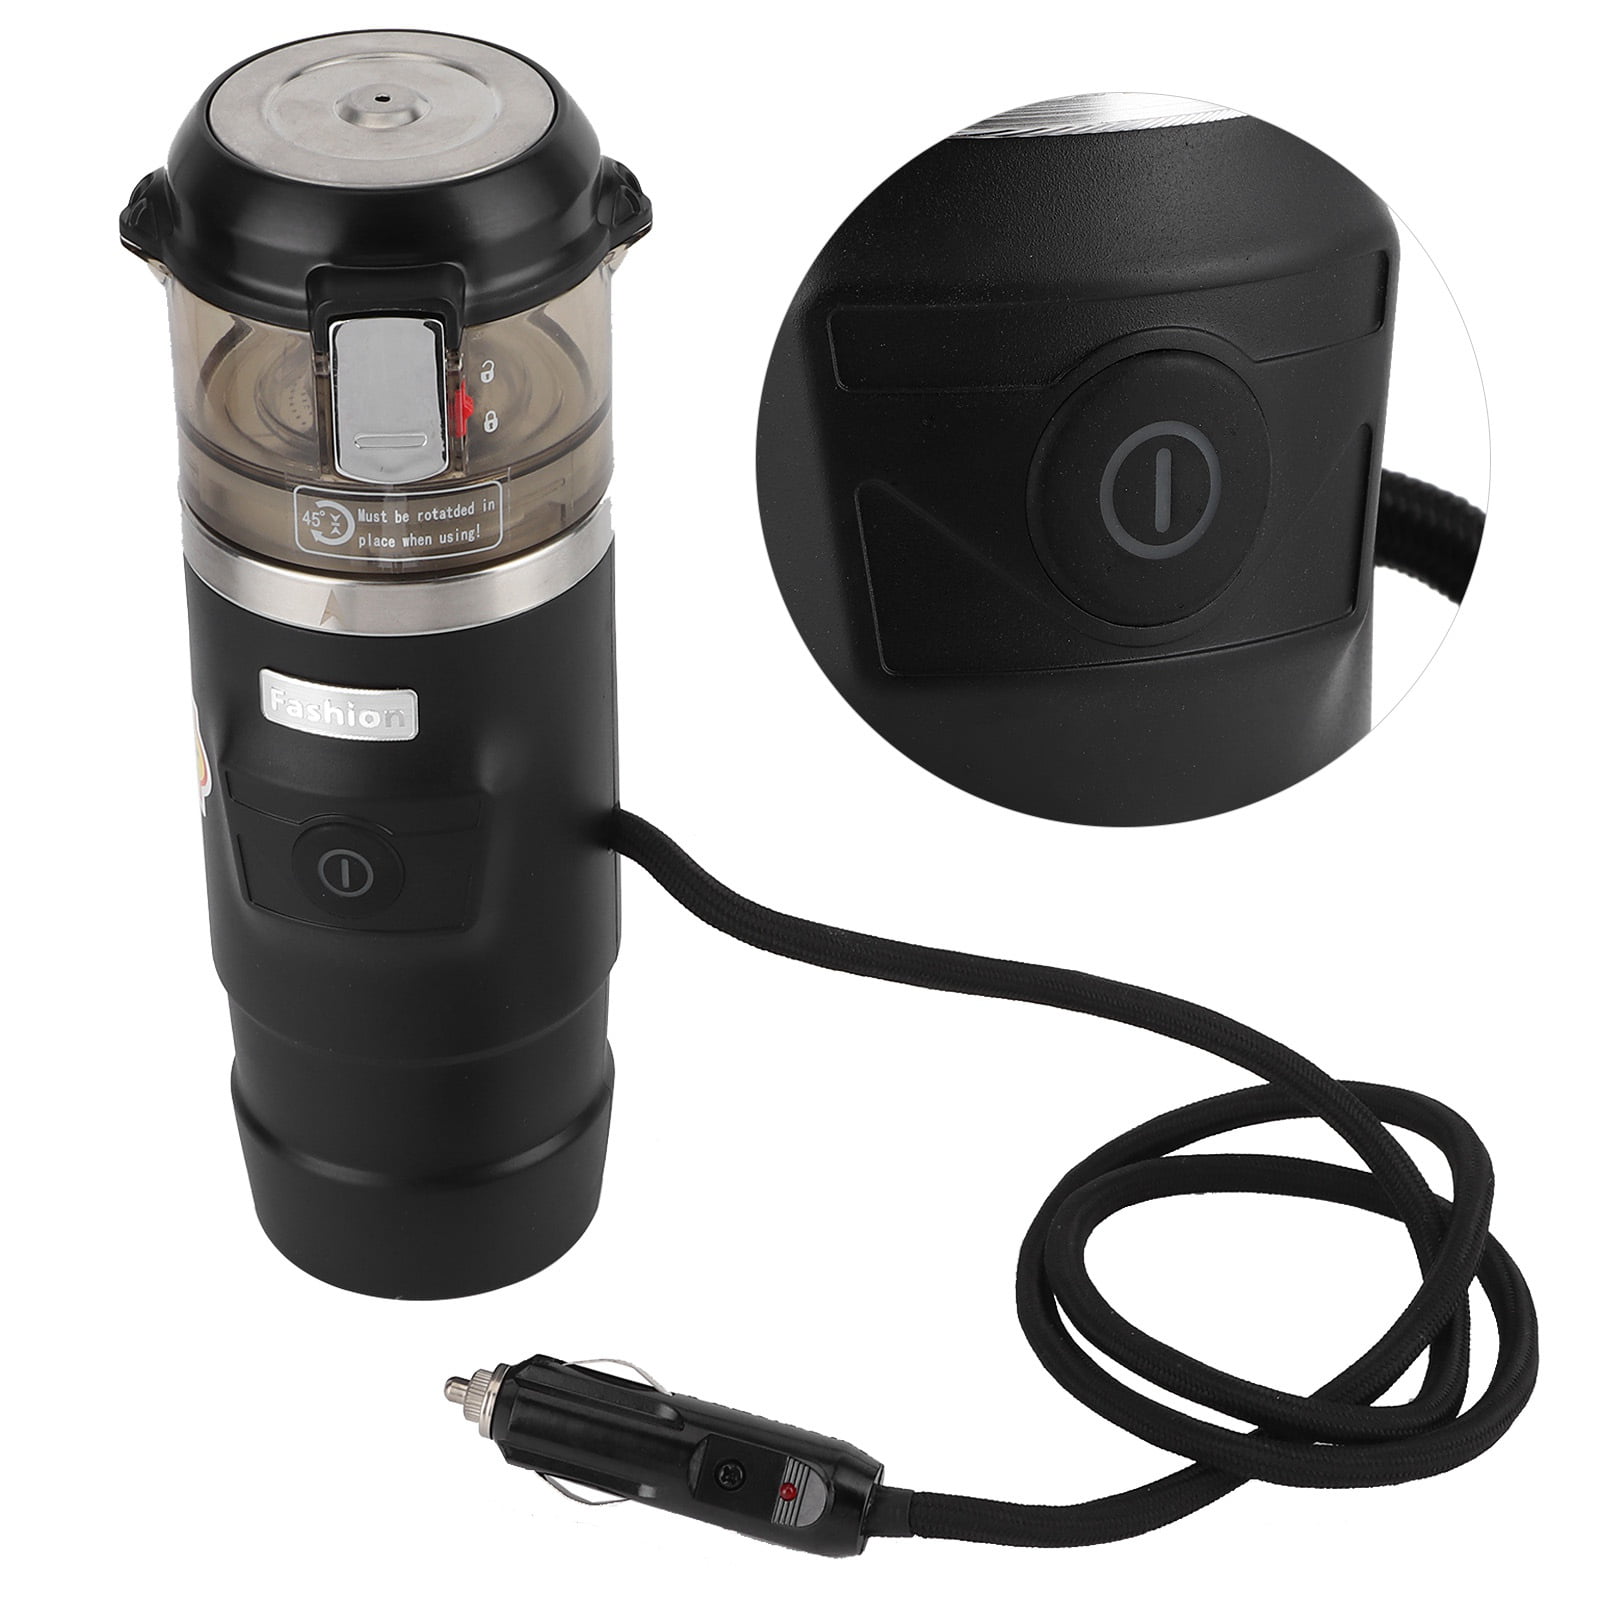 No need for drive-thru with in-car coffee maker 